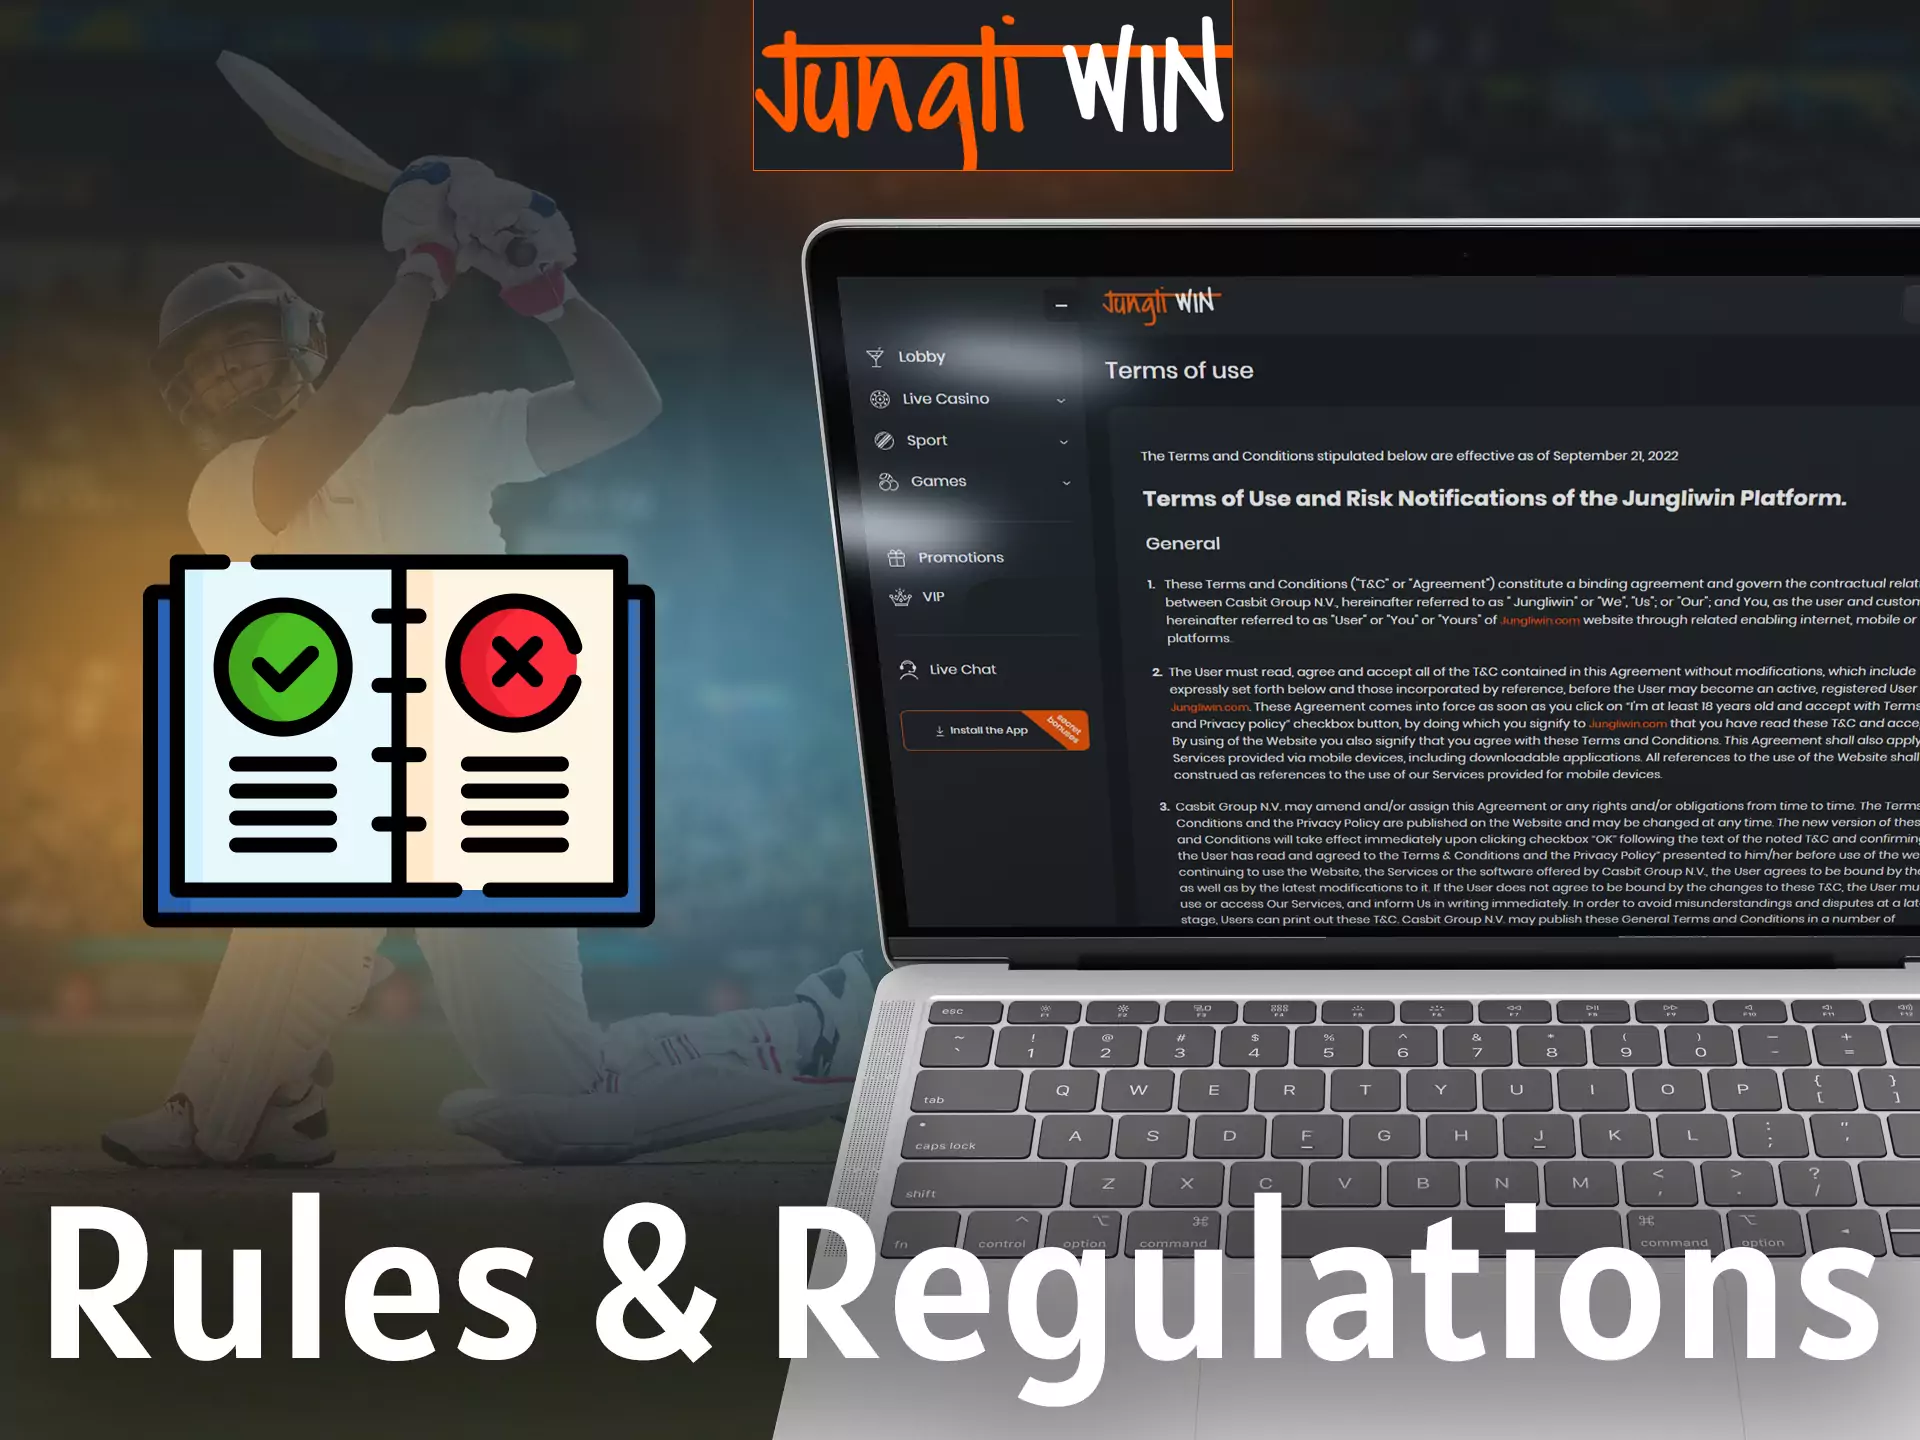 Learn all the rules and regulations on Jungliwin.